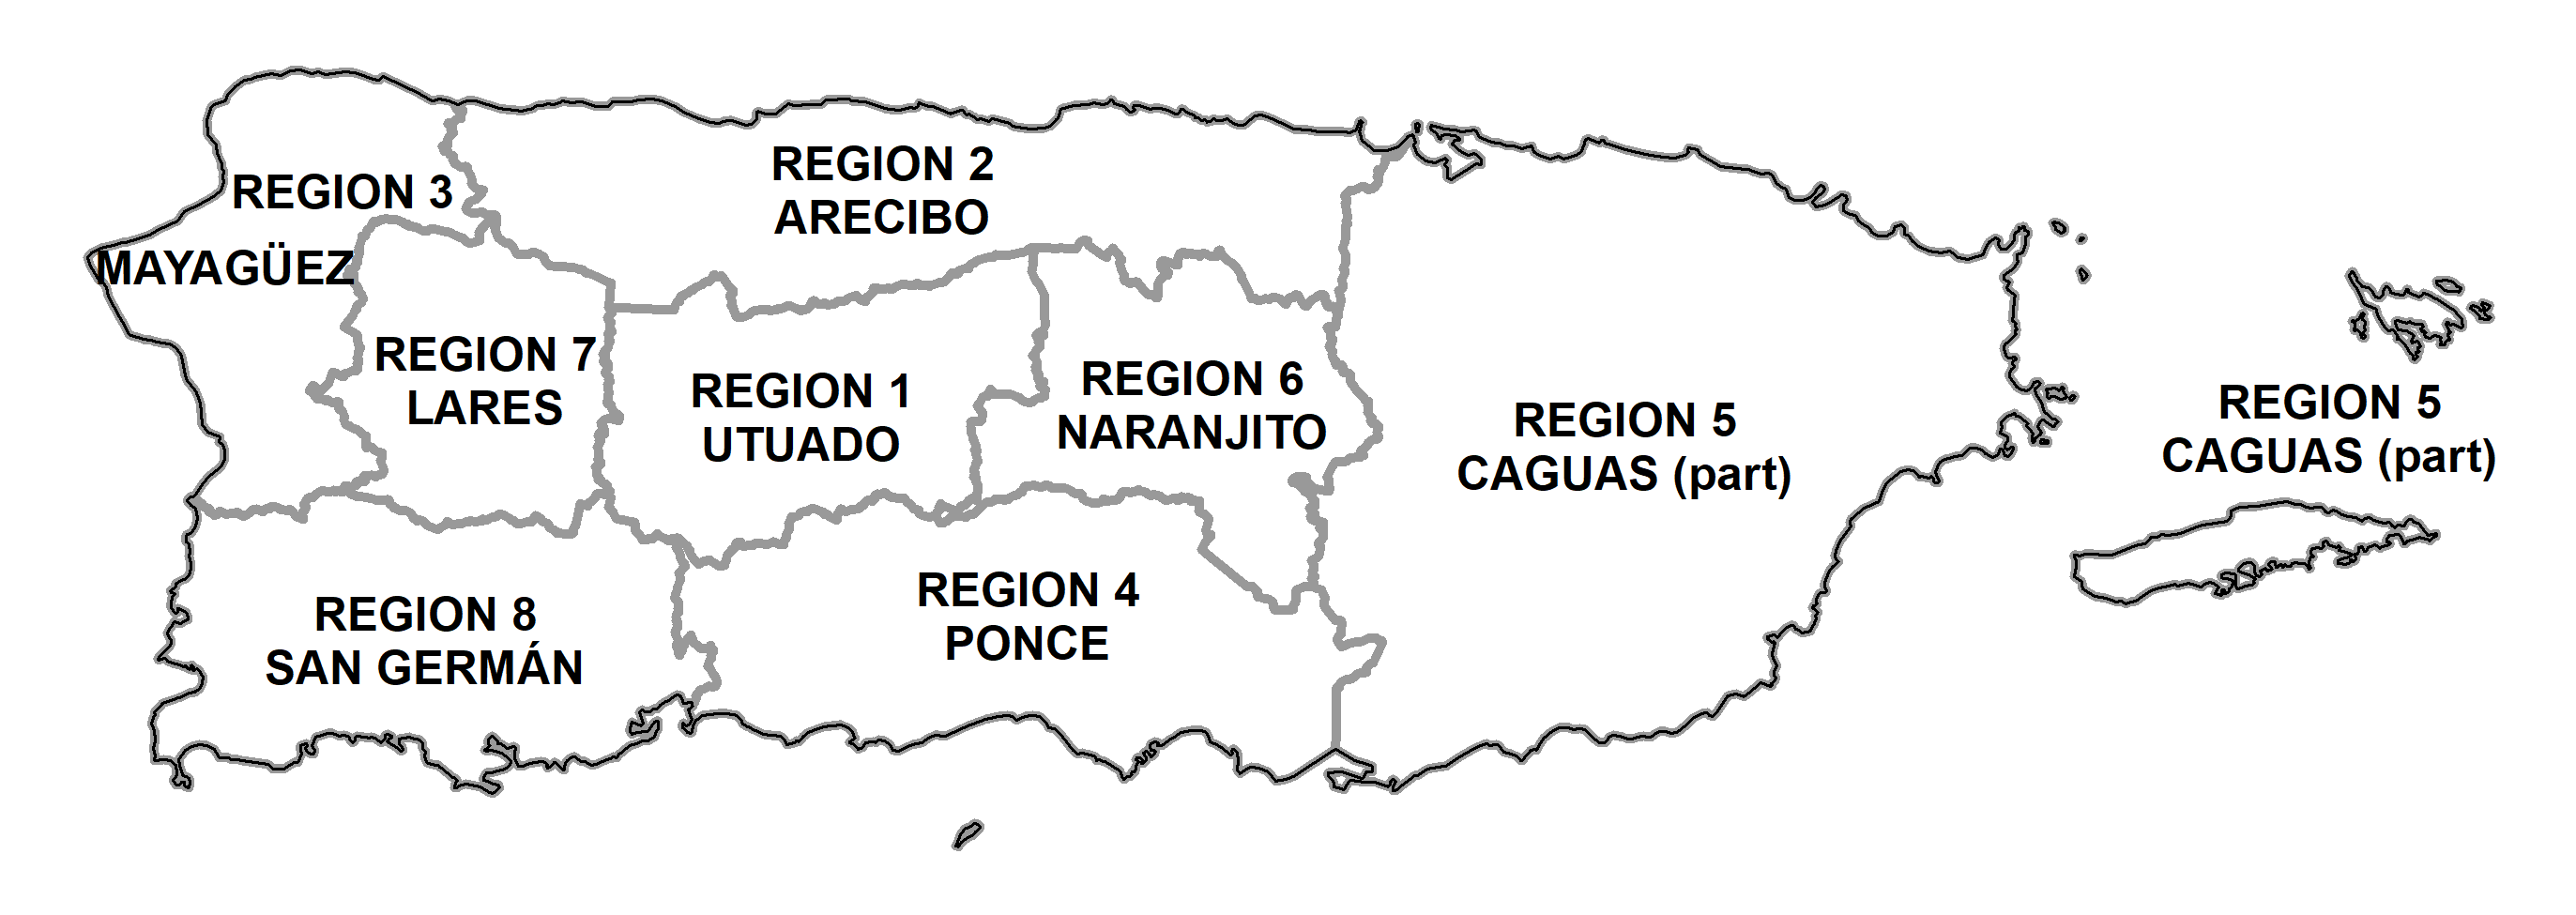 Image showing a regional map of Puerto Rico